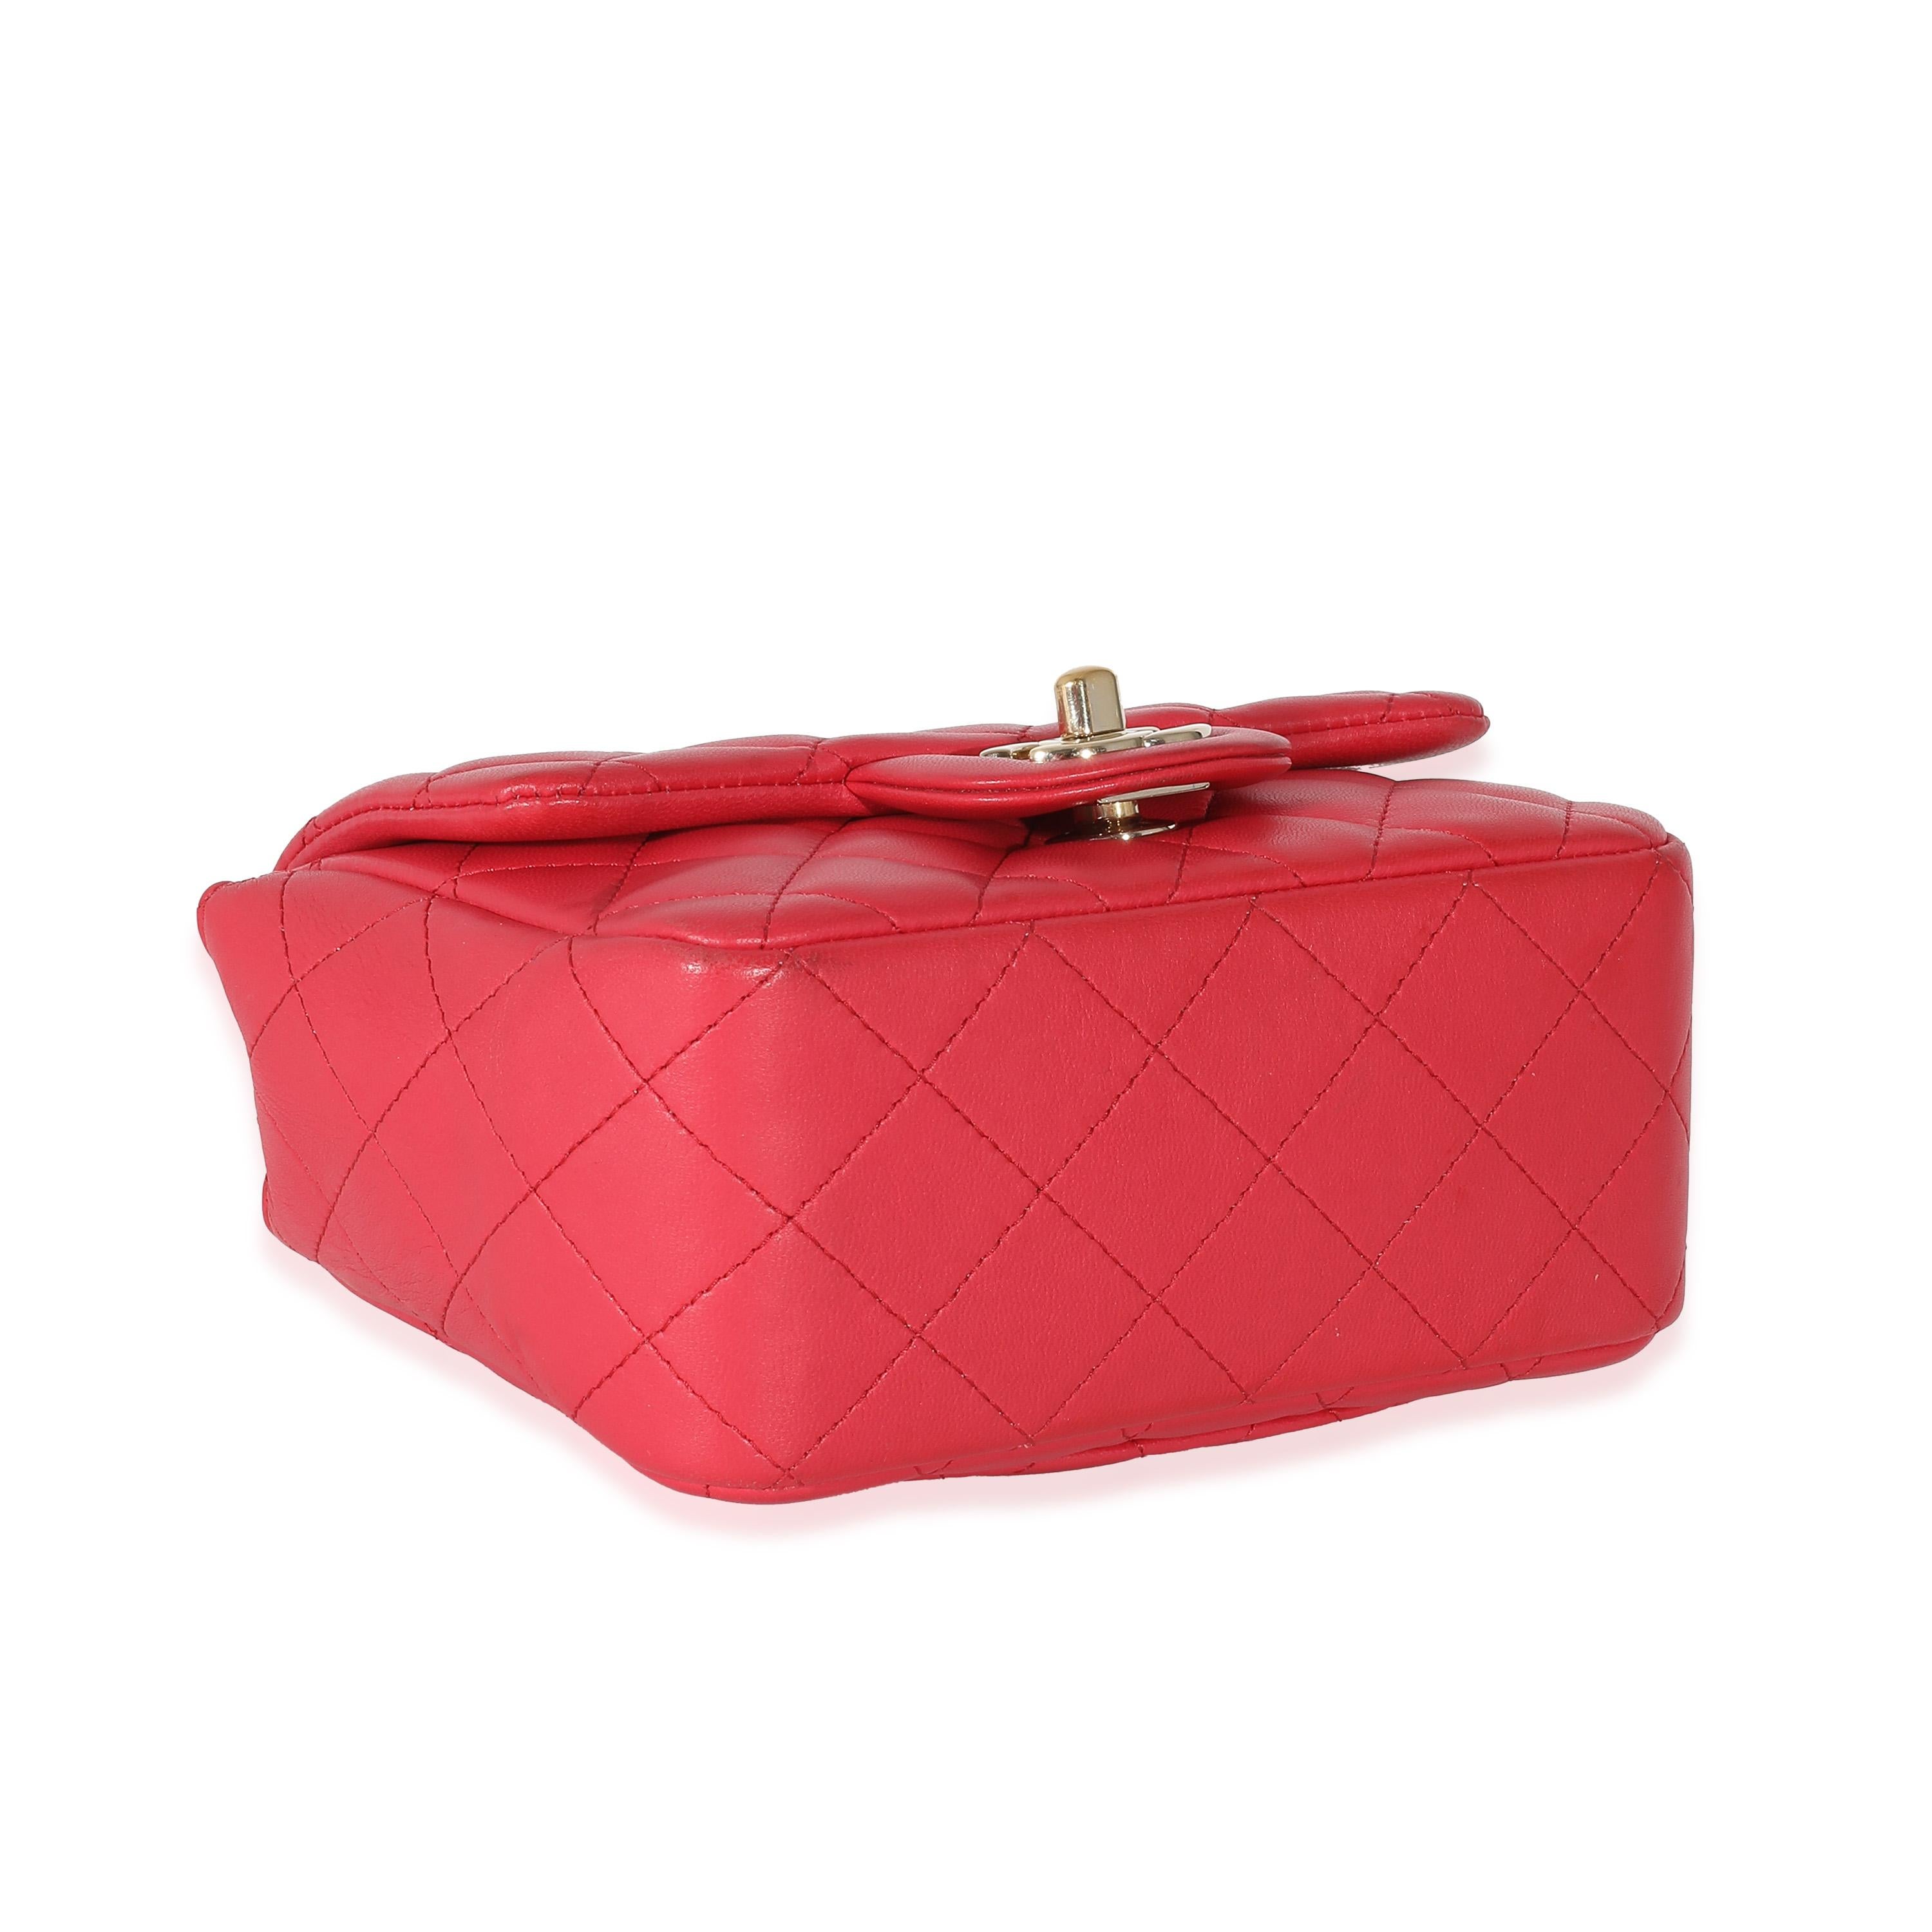 Listing Title: Chanel Dark Pink Quilted Lambskin Mini Square Flap Bag
SKU: 135053
Condition: Pre-owned 
Condition Description: A timeless classic that never goes out of style, the flap bag from Chanel dates back to 1955 and has seen a number of